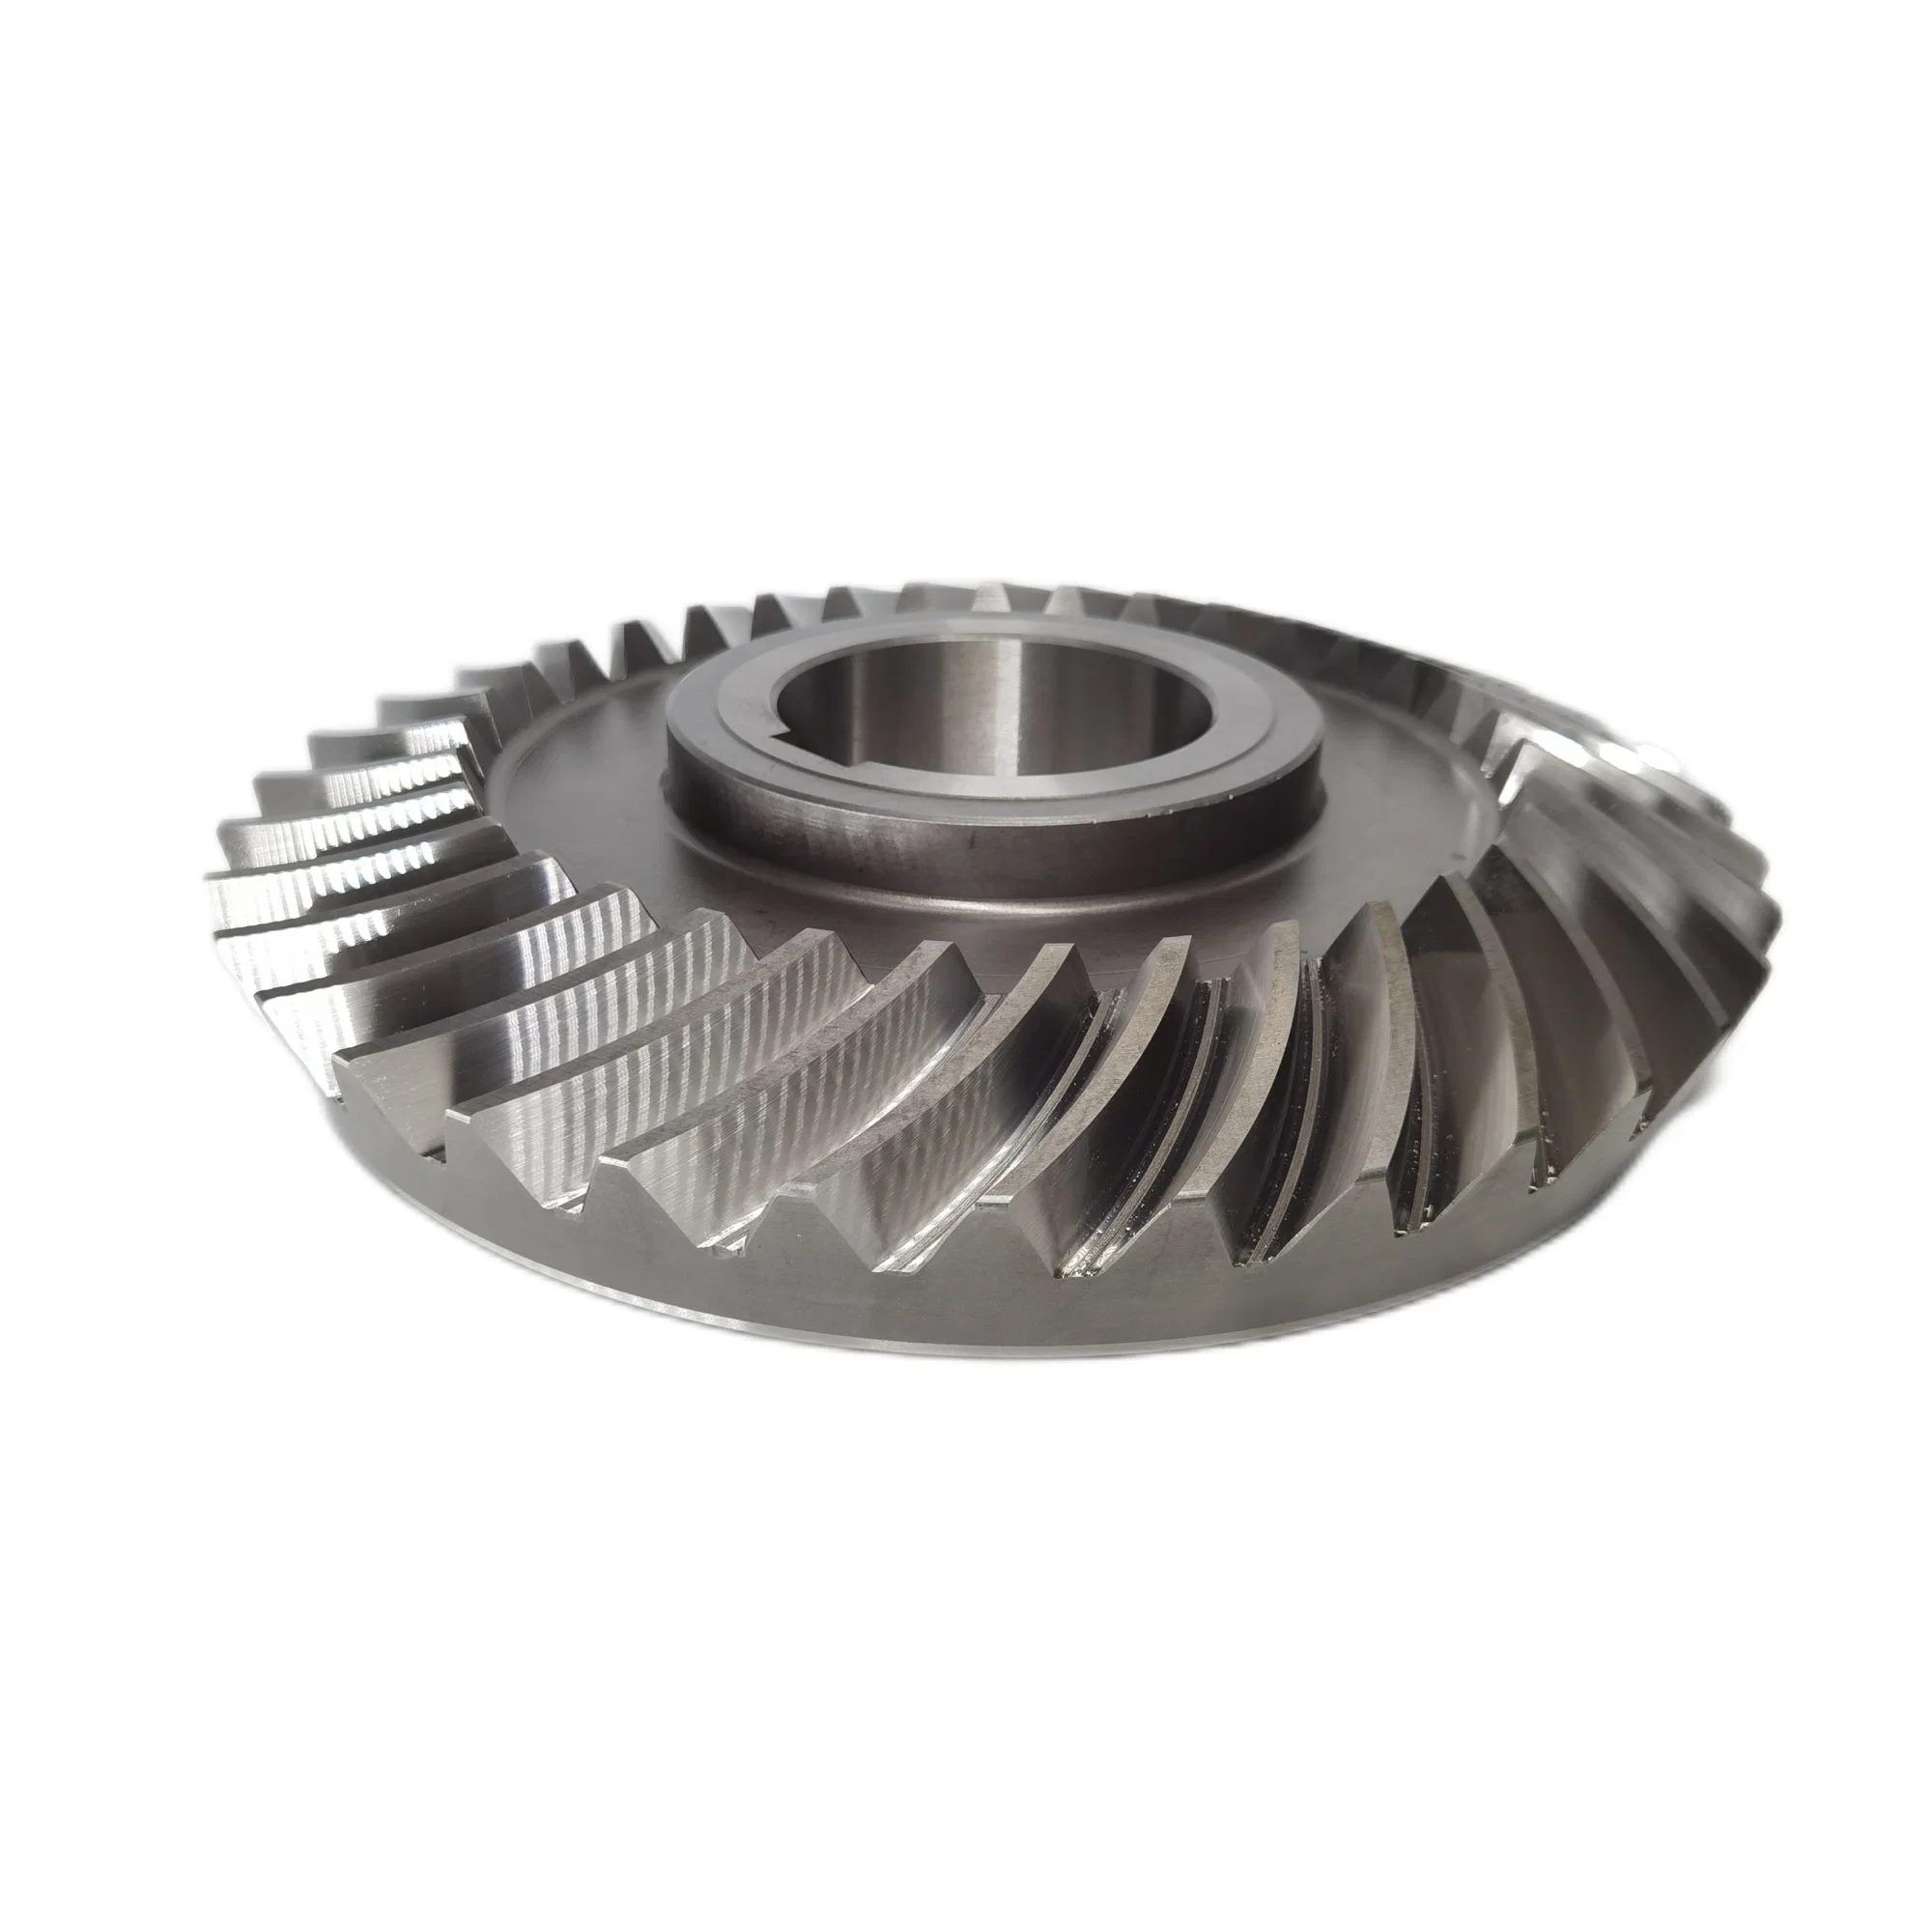 Bevel Gear Module 11 with 35 Teeth of 385mm Diameter and Spiral Right 35 Angle